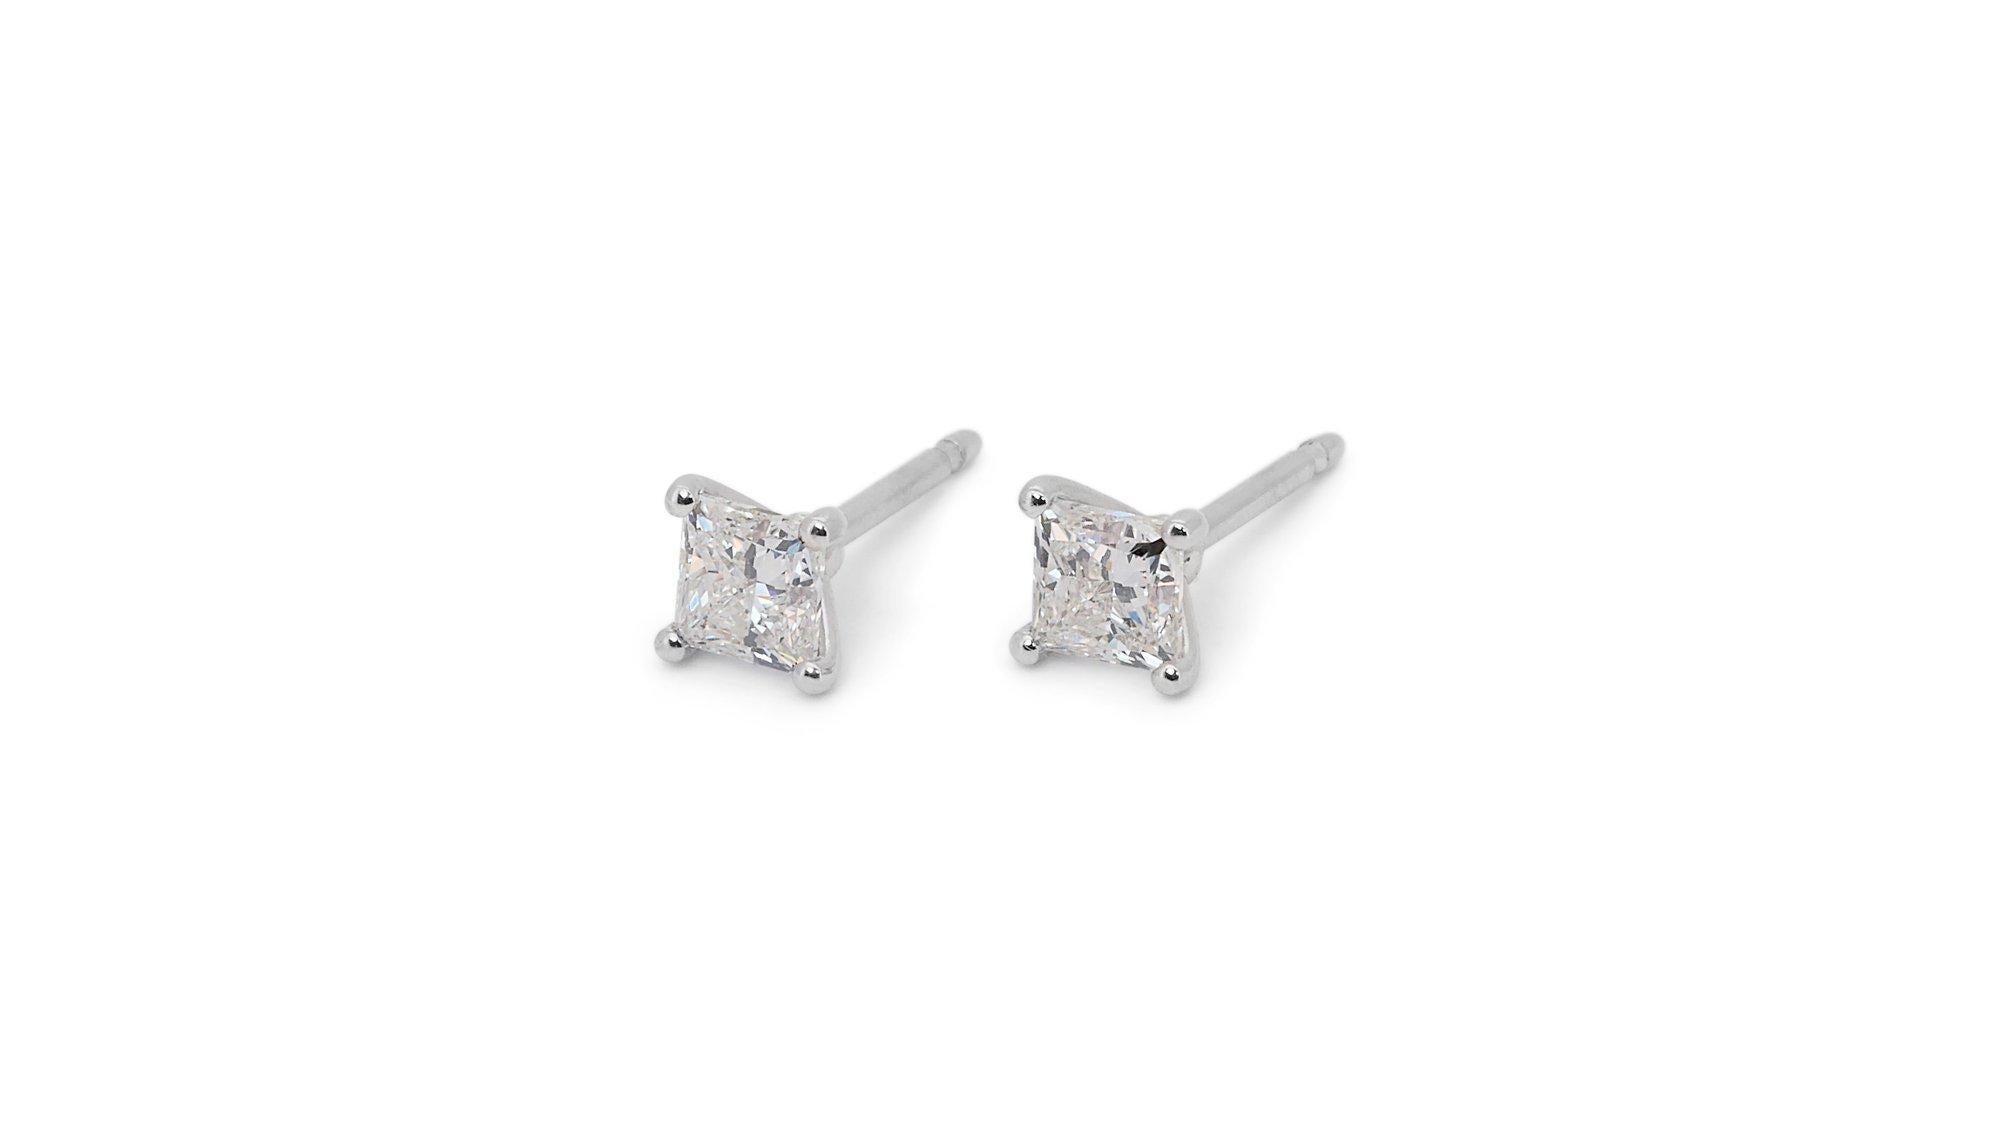 Women's 18k White Gold Princess Stud Earrings with 0.85 ct Natural Diamonds AIG Cert